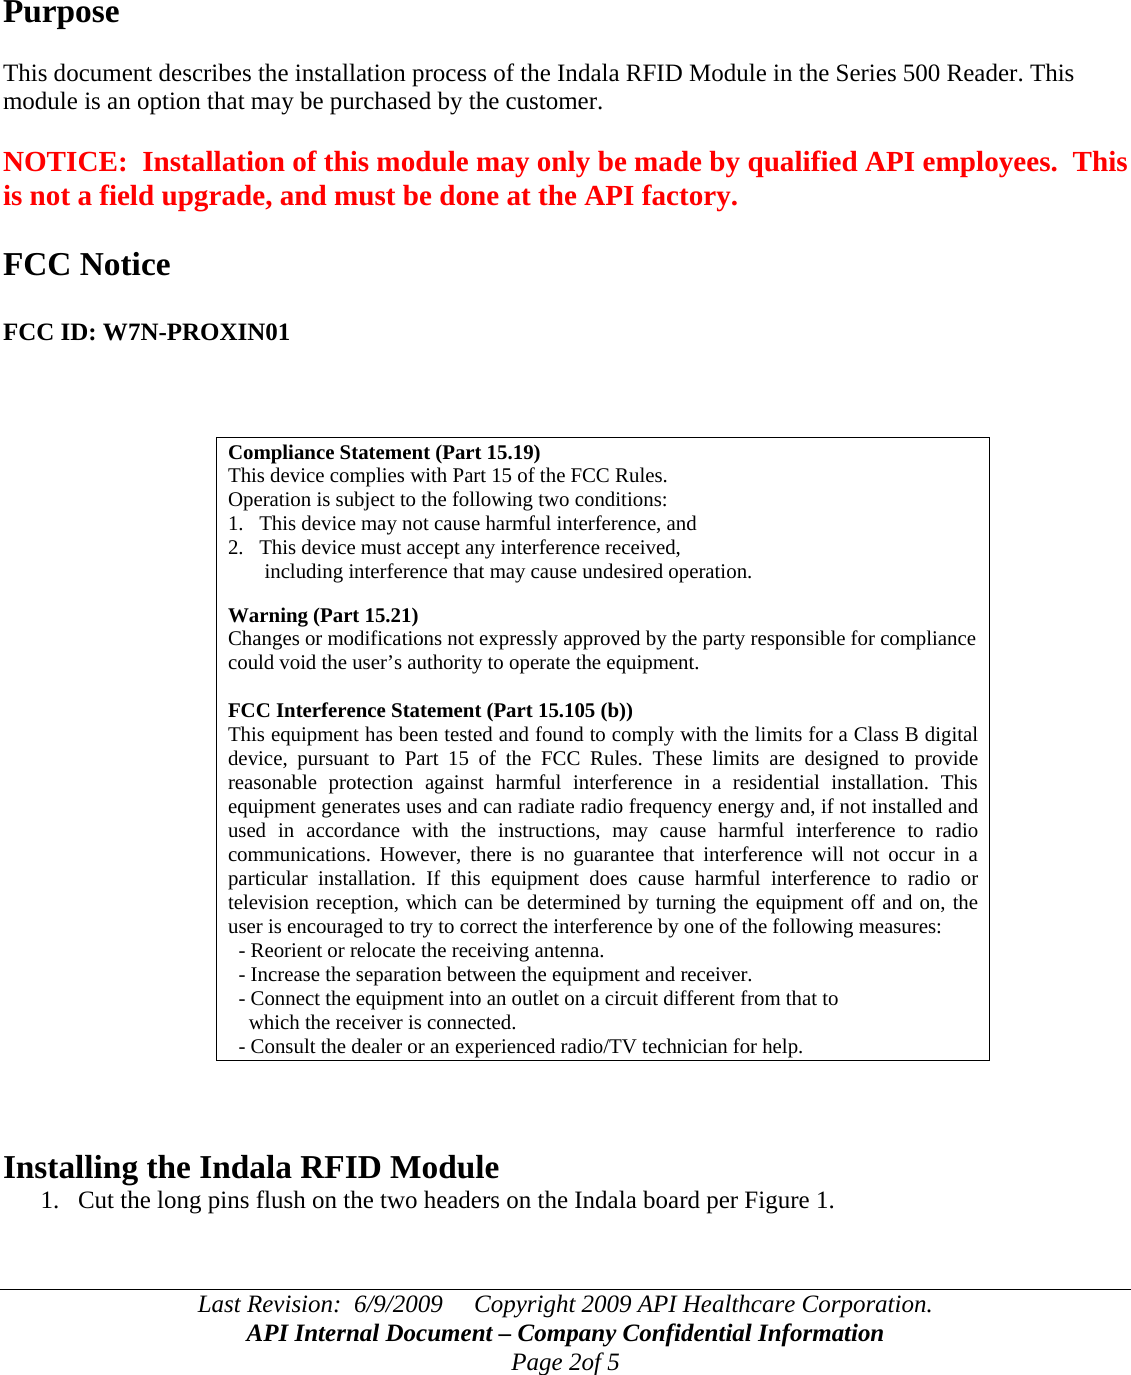 Last Revision:  6/9/2009     Copyright 2009 API Healthcare Corporation. API Internal Document – Company Confidential Information Page 2of 5     Purpose  This document describes the installation process of the Indala RFID Module in the Series 500 Reader. This module is an option that may be purchased by the customer.  NOTICE:  Installation of this module may only be made by qualified API employees.  This is not a field upgrade, and must be done at the API factory.  FCC Notice  FCC ID: W7N-PROXIN01    Compliance Statement (Part 15.19) This device complies with Part 15 of the FCC Rules.  Operation is subject to the following two conditions:  1.   This device may not cause harmful interference, and  2.   This device must accept any interference received,         including interference that may cause undesired operation.  Warning (Part 15.21) Changes or modifications not expressly approved by the party responsible for compliance could void the user’s authority to operate the equipment.  FCC Interference Statement (Part 15.105 (b)) This equipment has been tested and found to comply with the limits for a Class B digital device, pursuant to Part 15 of the FCC Rules. These limits are designed to provide reasonable protection against harmful interference in a residential installation. This equipment generates uses and can radiate radio frequency energy and, if not installed and used in accordance with the instructions, may cause harmful interference to radio communications. However, there is no guarantee that interference will not occur in a particular installation. If this equipment does cause harmful interference to radio or television reception, which can be determined by turning the equipment off and on, the user is encouraged to try to correct the interference by one of the following measures:   - Reorient or relocate the receiving antenna.   - Increase the separation between the equipment and receiver.   - Connect the equipment into an outlet on a circuit different from that to     which the receiver is connected.   - Consult the dealer or an experienced radio/TV technician for help.    Installing the Indala RFID Module 1. Cut the long pins flush on the two headers on the Indala board per Figure 1.  